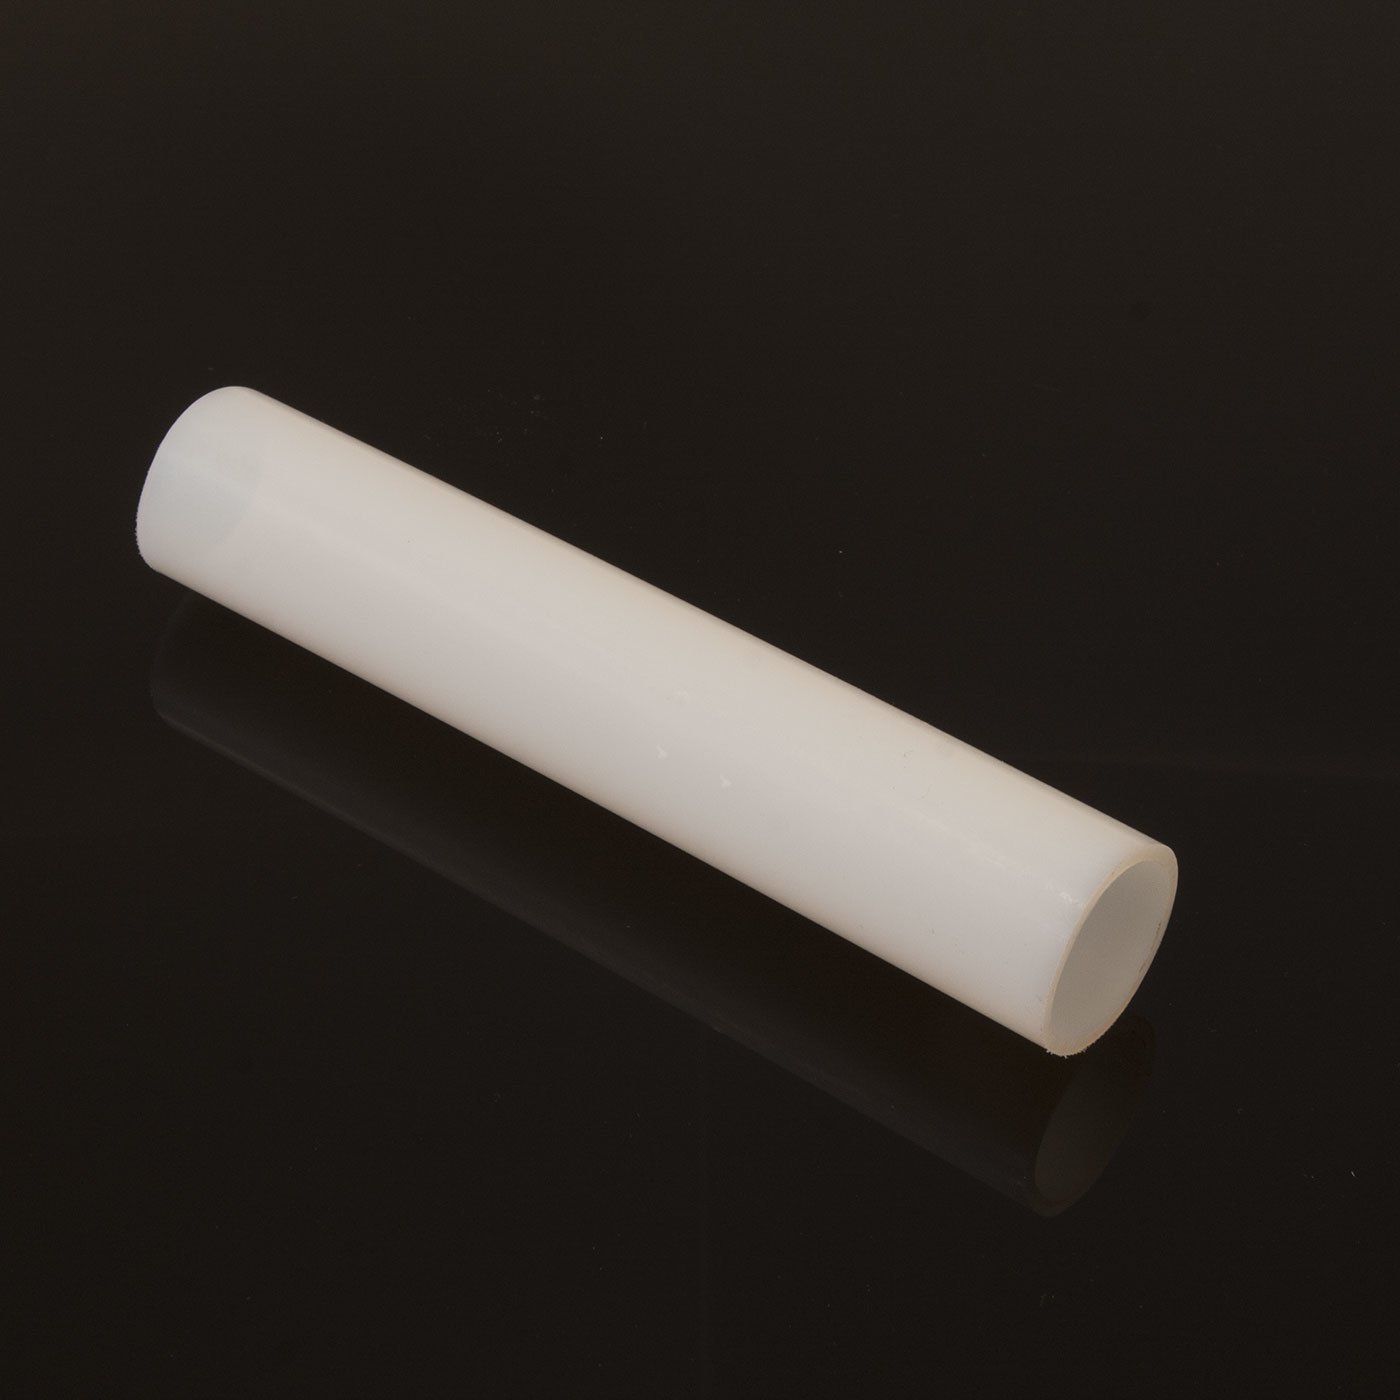 15 cm PTFE-tubing for 25 mm tubes